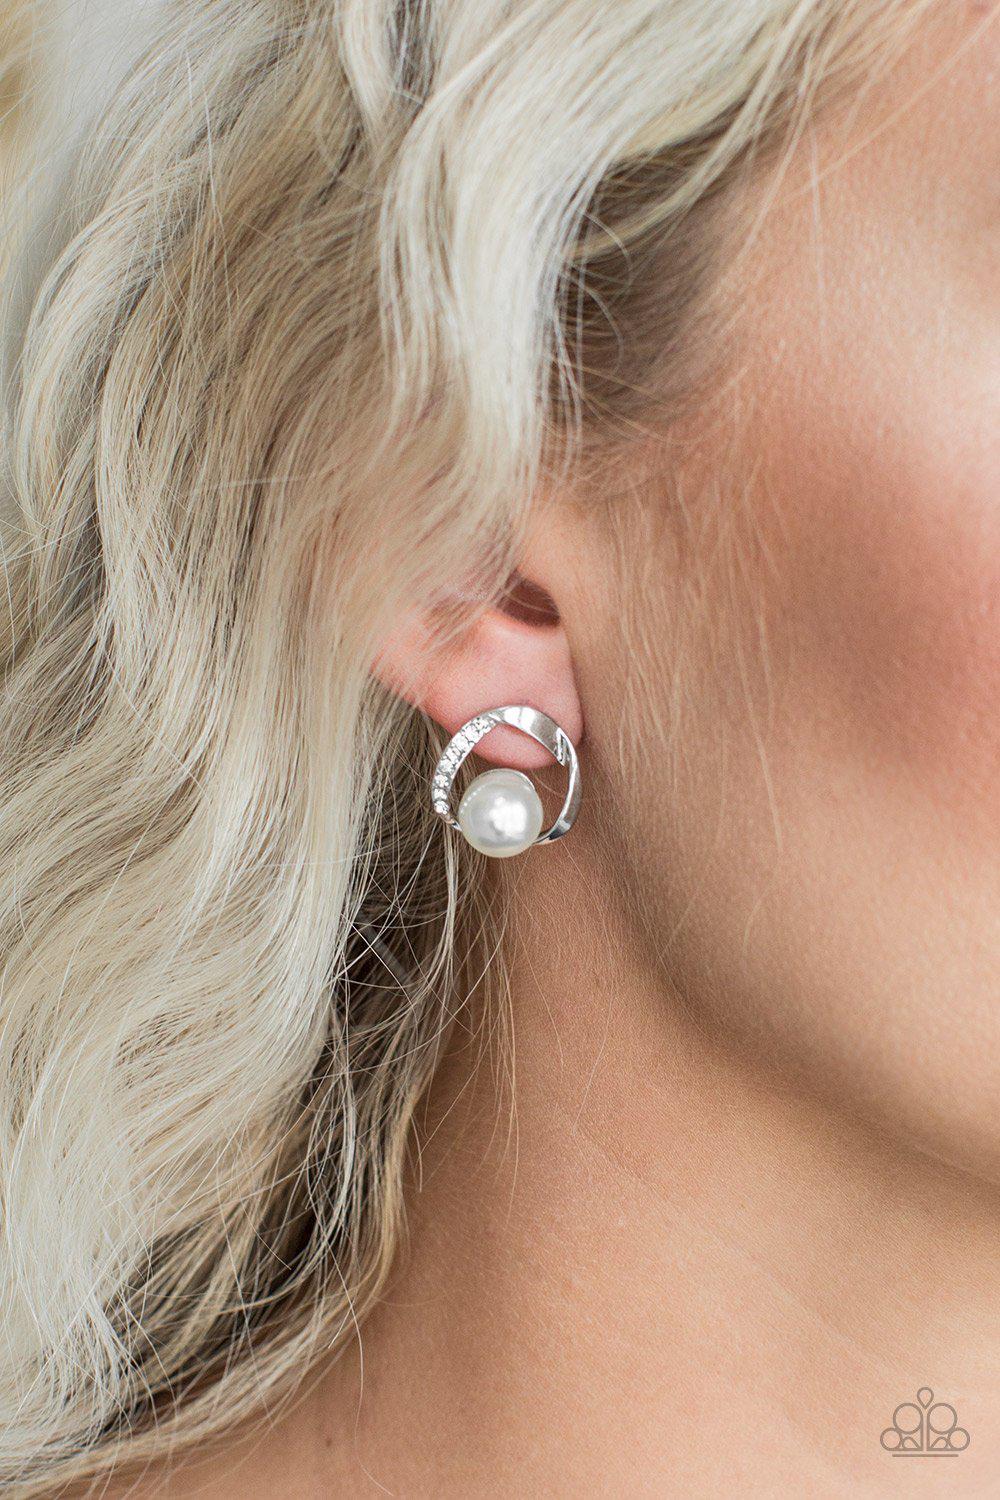 Stylishly Suave Silver and White Pearl Earrings - Paparazzi Accessories-CarasShop.com - $5 Jewelry by Cara Jewels